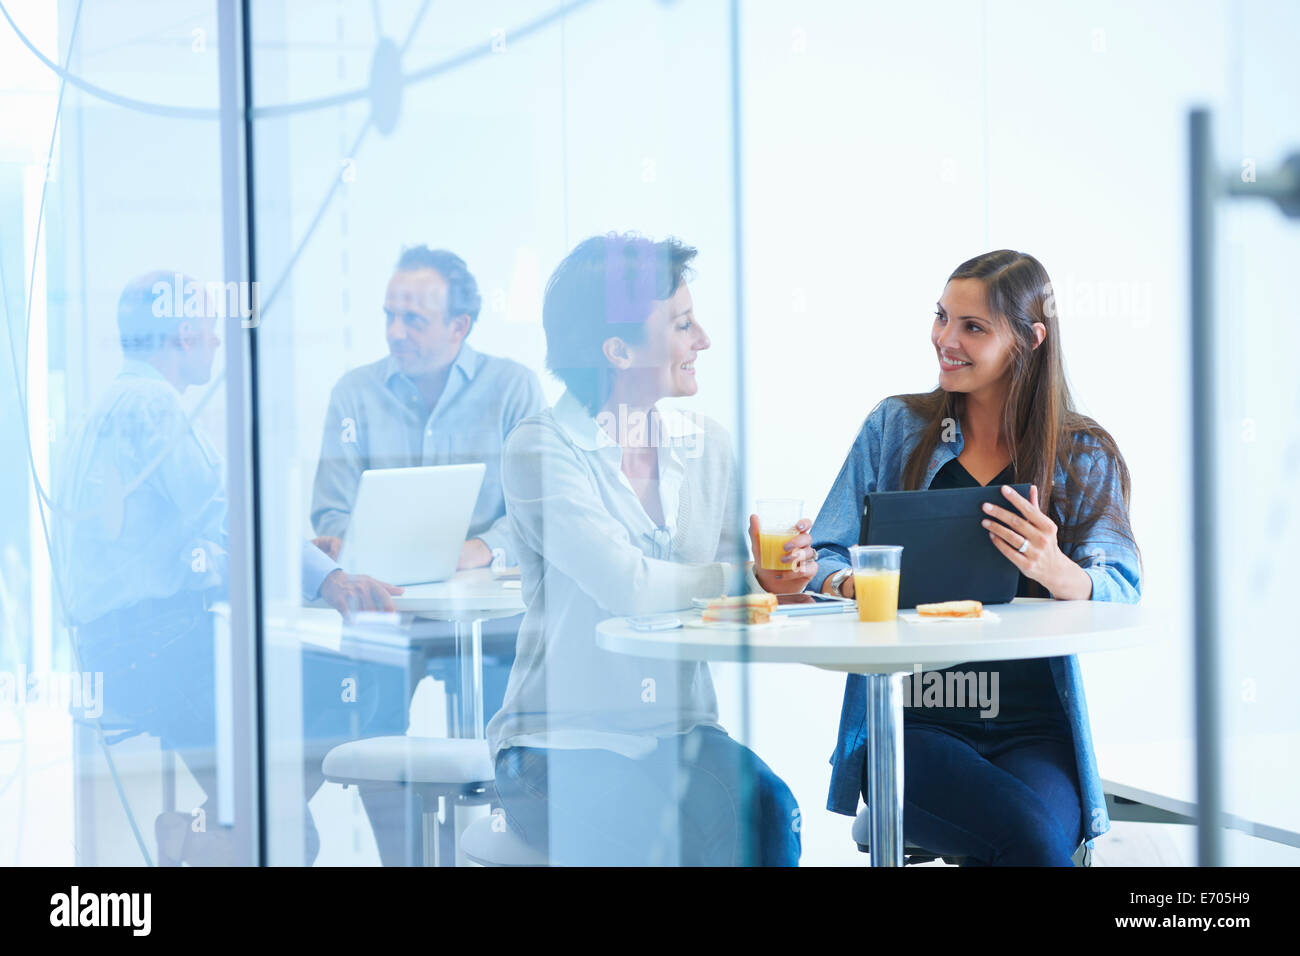 Business people having discussion over lunch Stock Photo